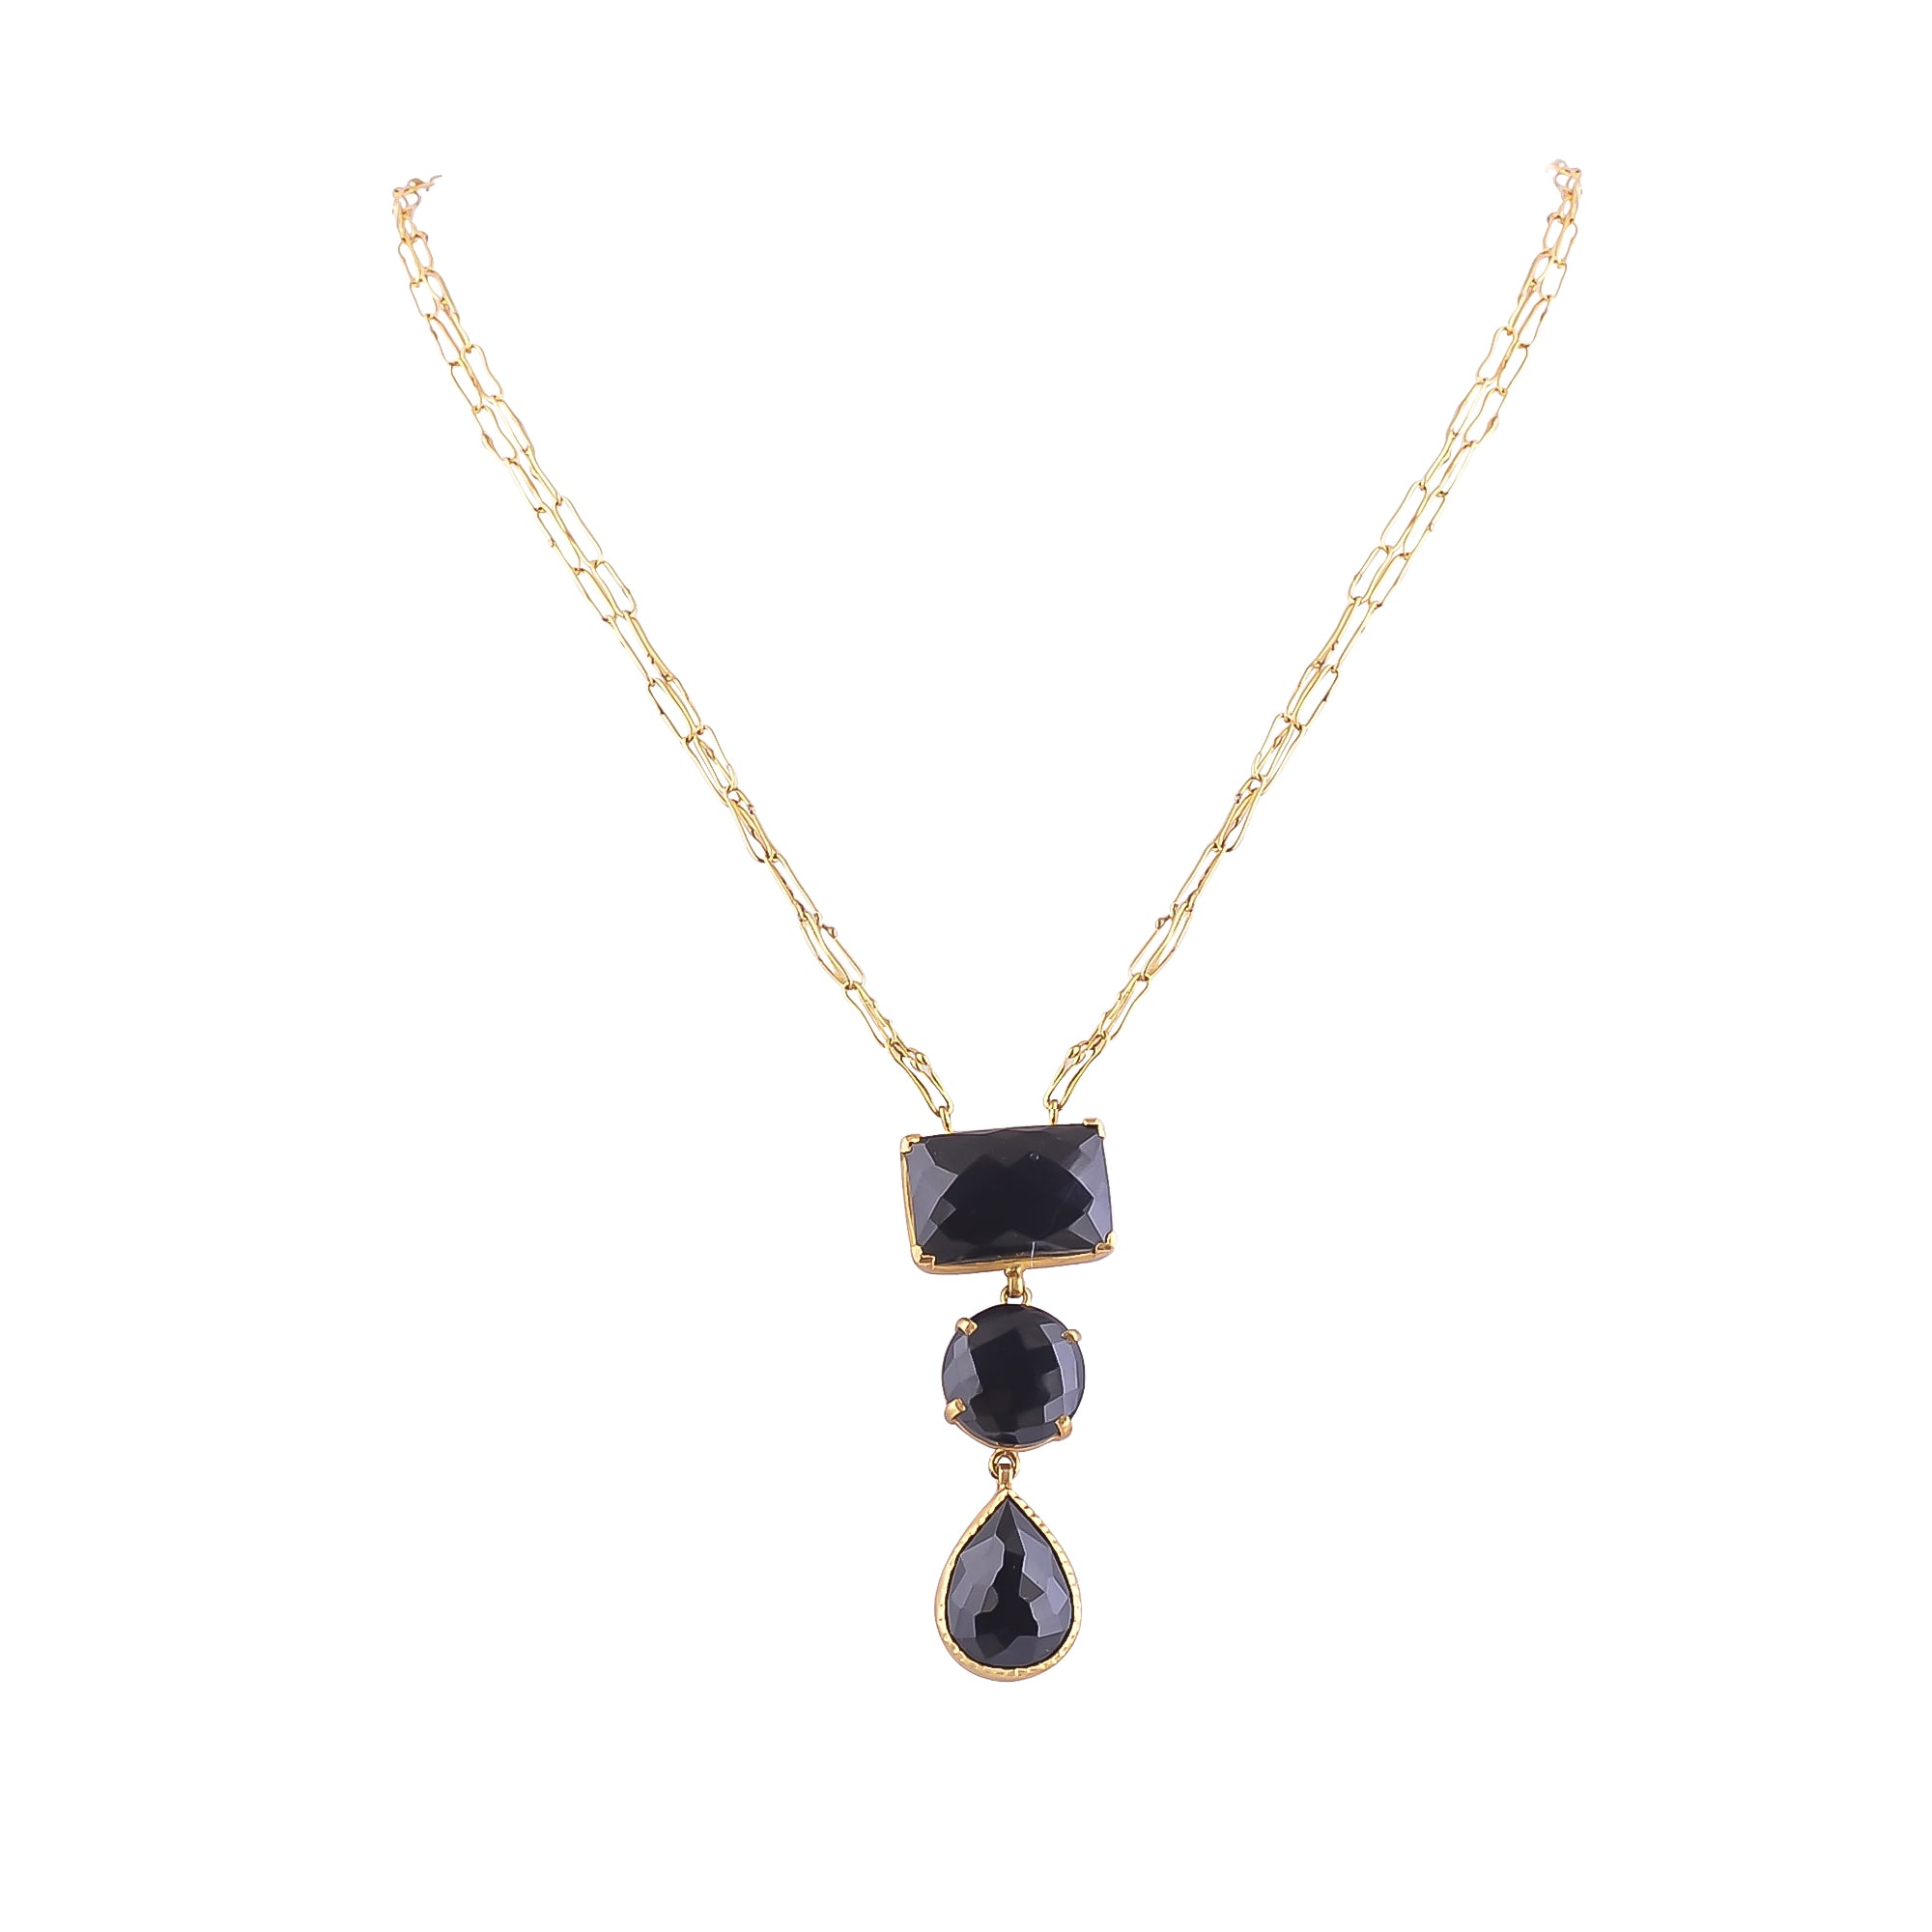 Buy Handmade Silver Gold Plated Black Onyx Pendant Necklace